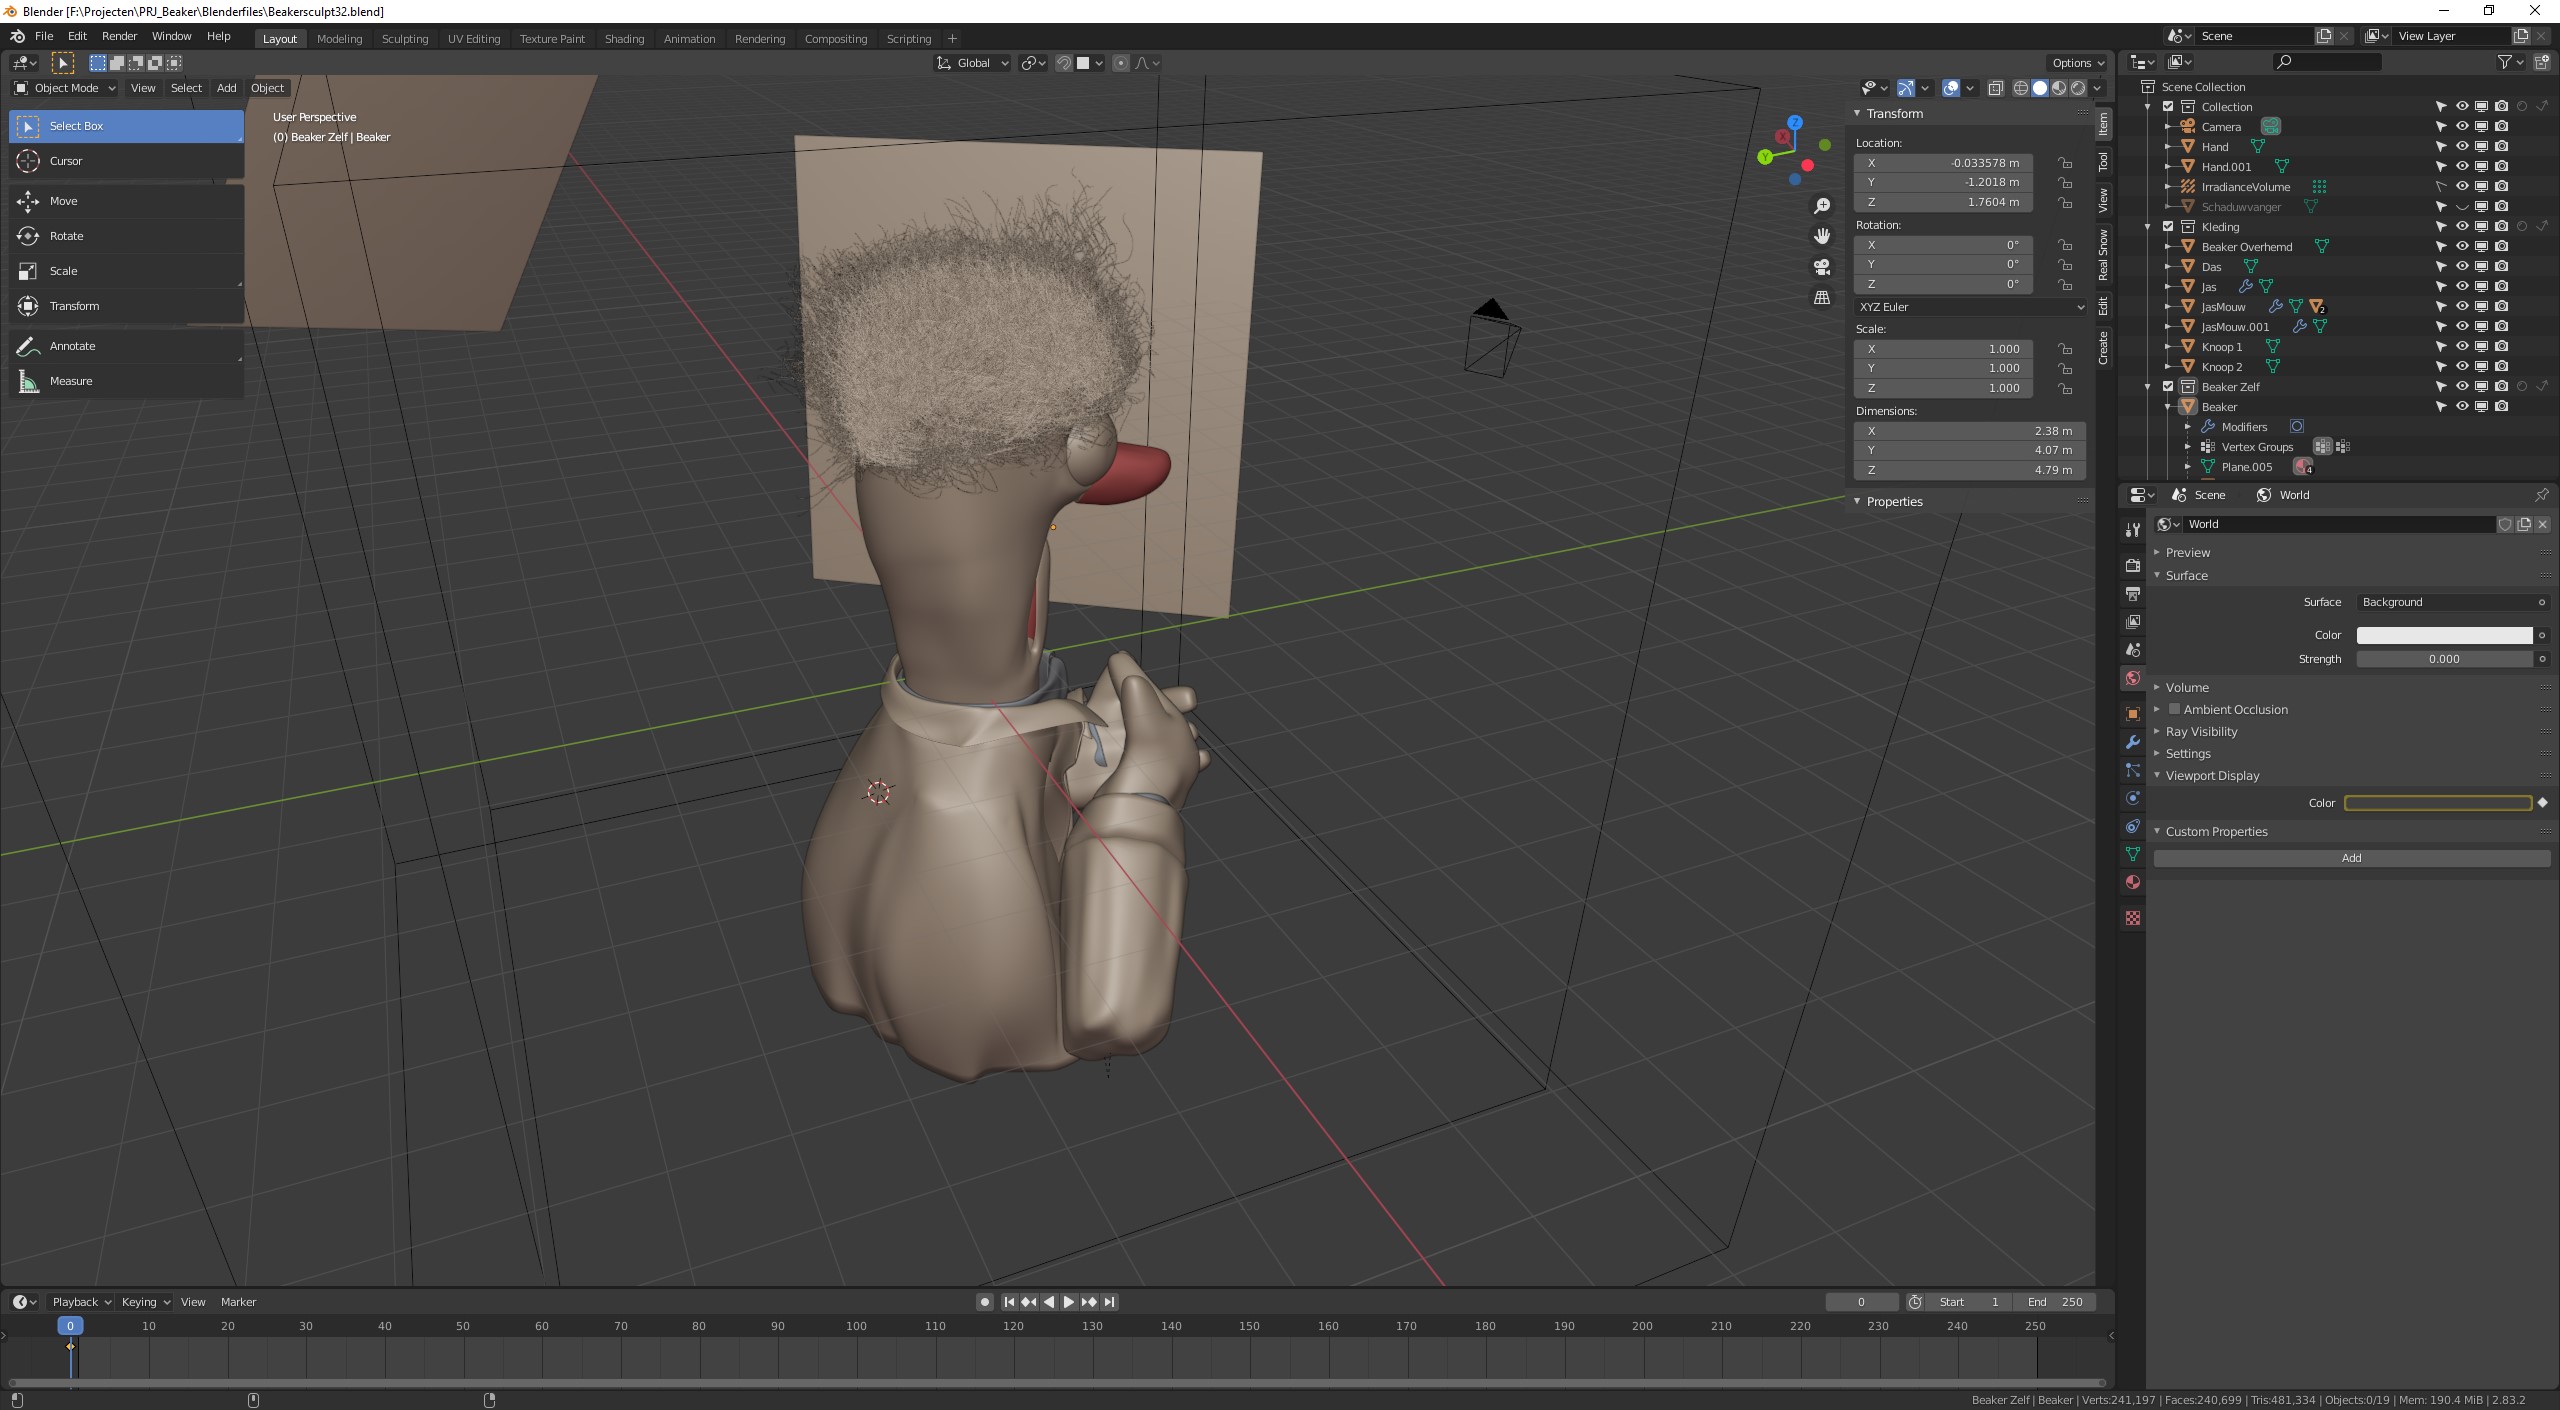 Beaker from The Muppet Show :) - Finished Projects - Blender